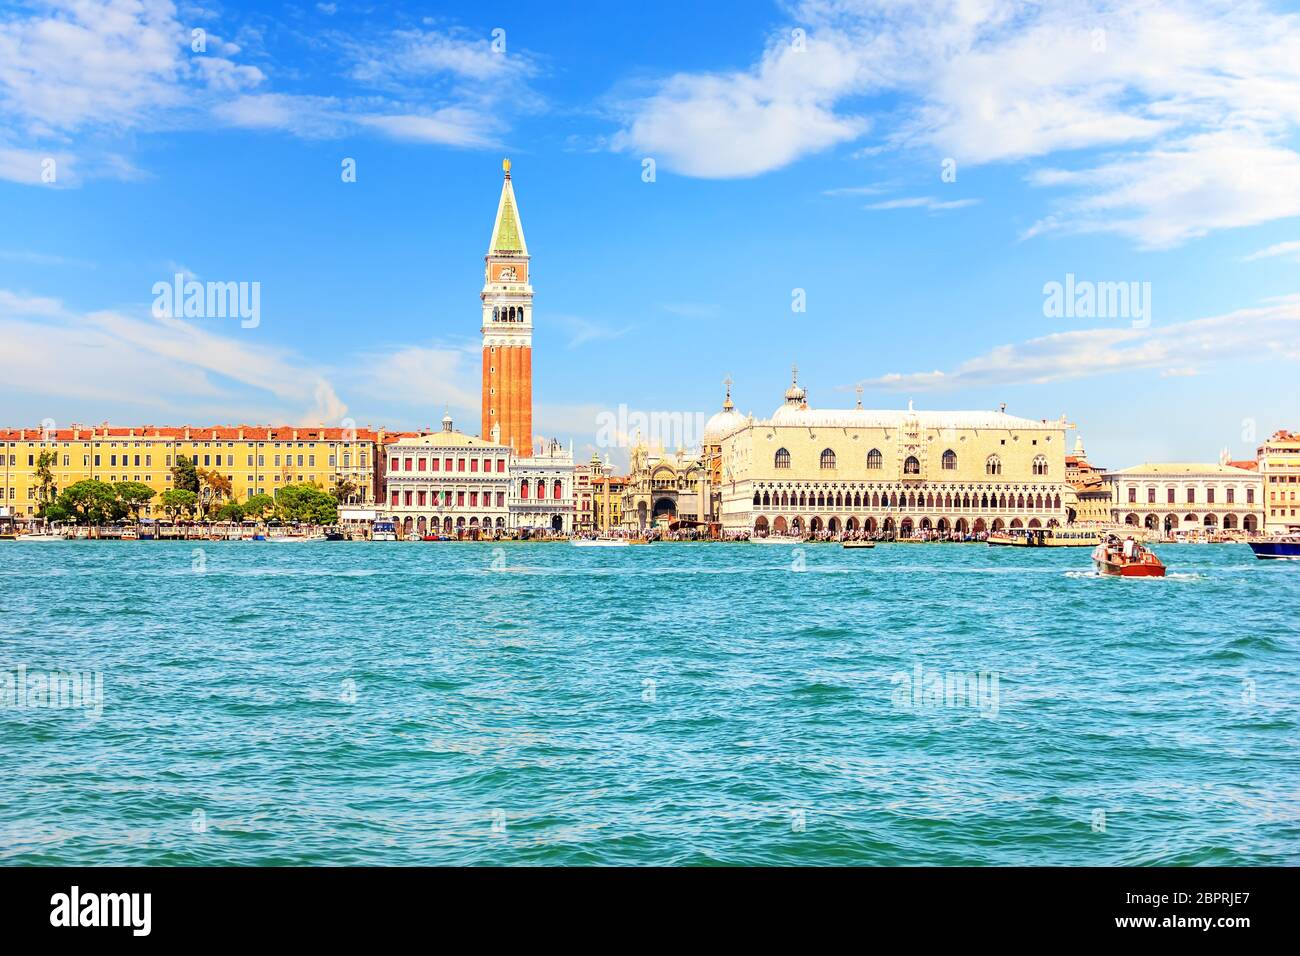 The Doge's Palace and the Campanile of Piazza San Marco in Venice, Italy, sea view. Stock Photo